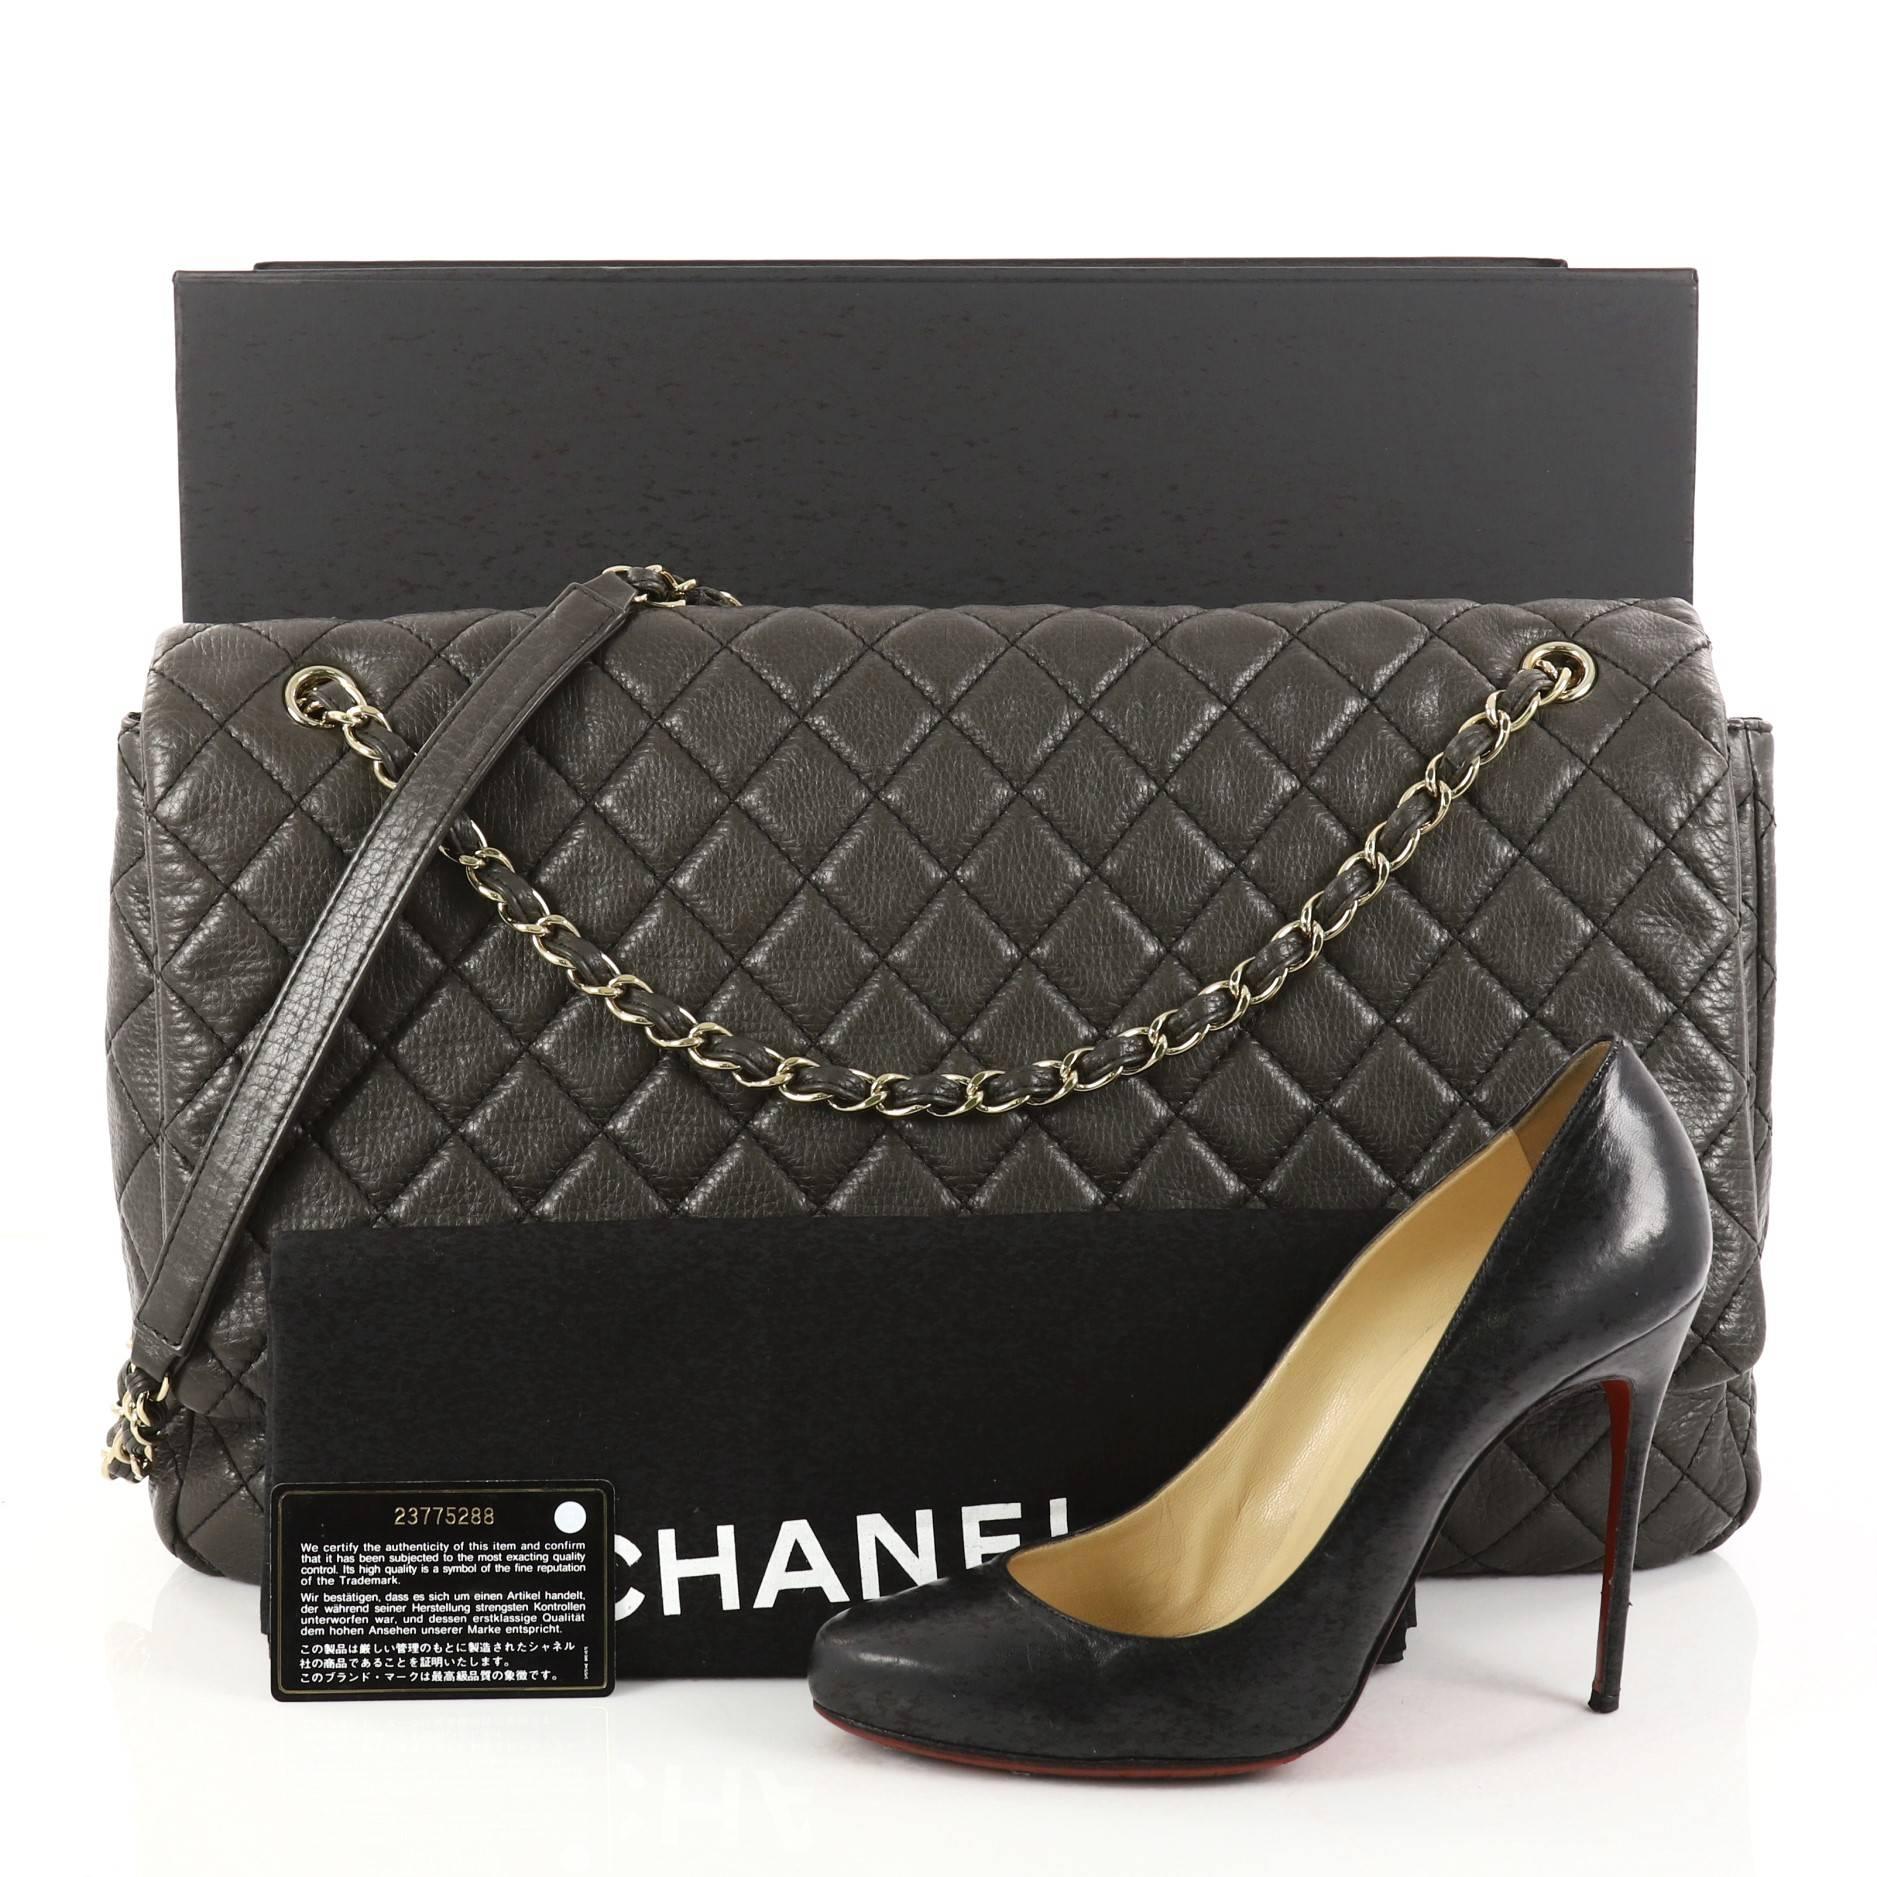 This authentic Chanel Airlines CC Flap Bag Quilted Calfskin XXL is an oversized travel beauty made for all Chanel lovers. Crafted in olive green calfskin leather in signature diamond quilting, this larger-than-life flap bag features woven-in leather